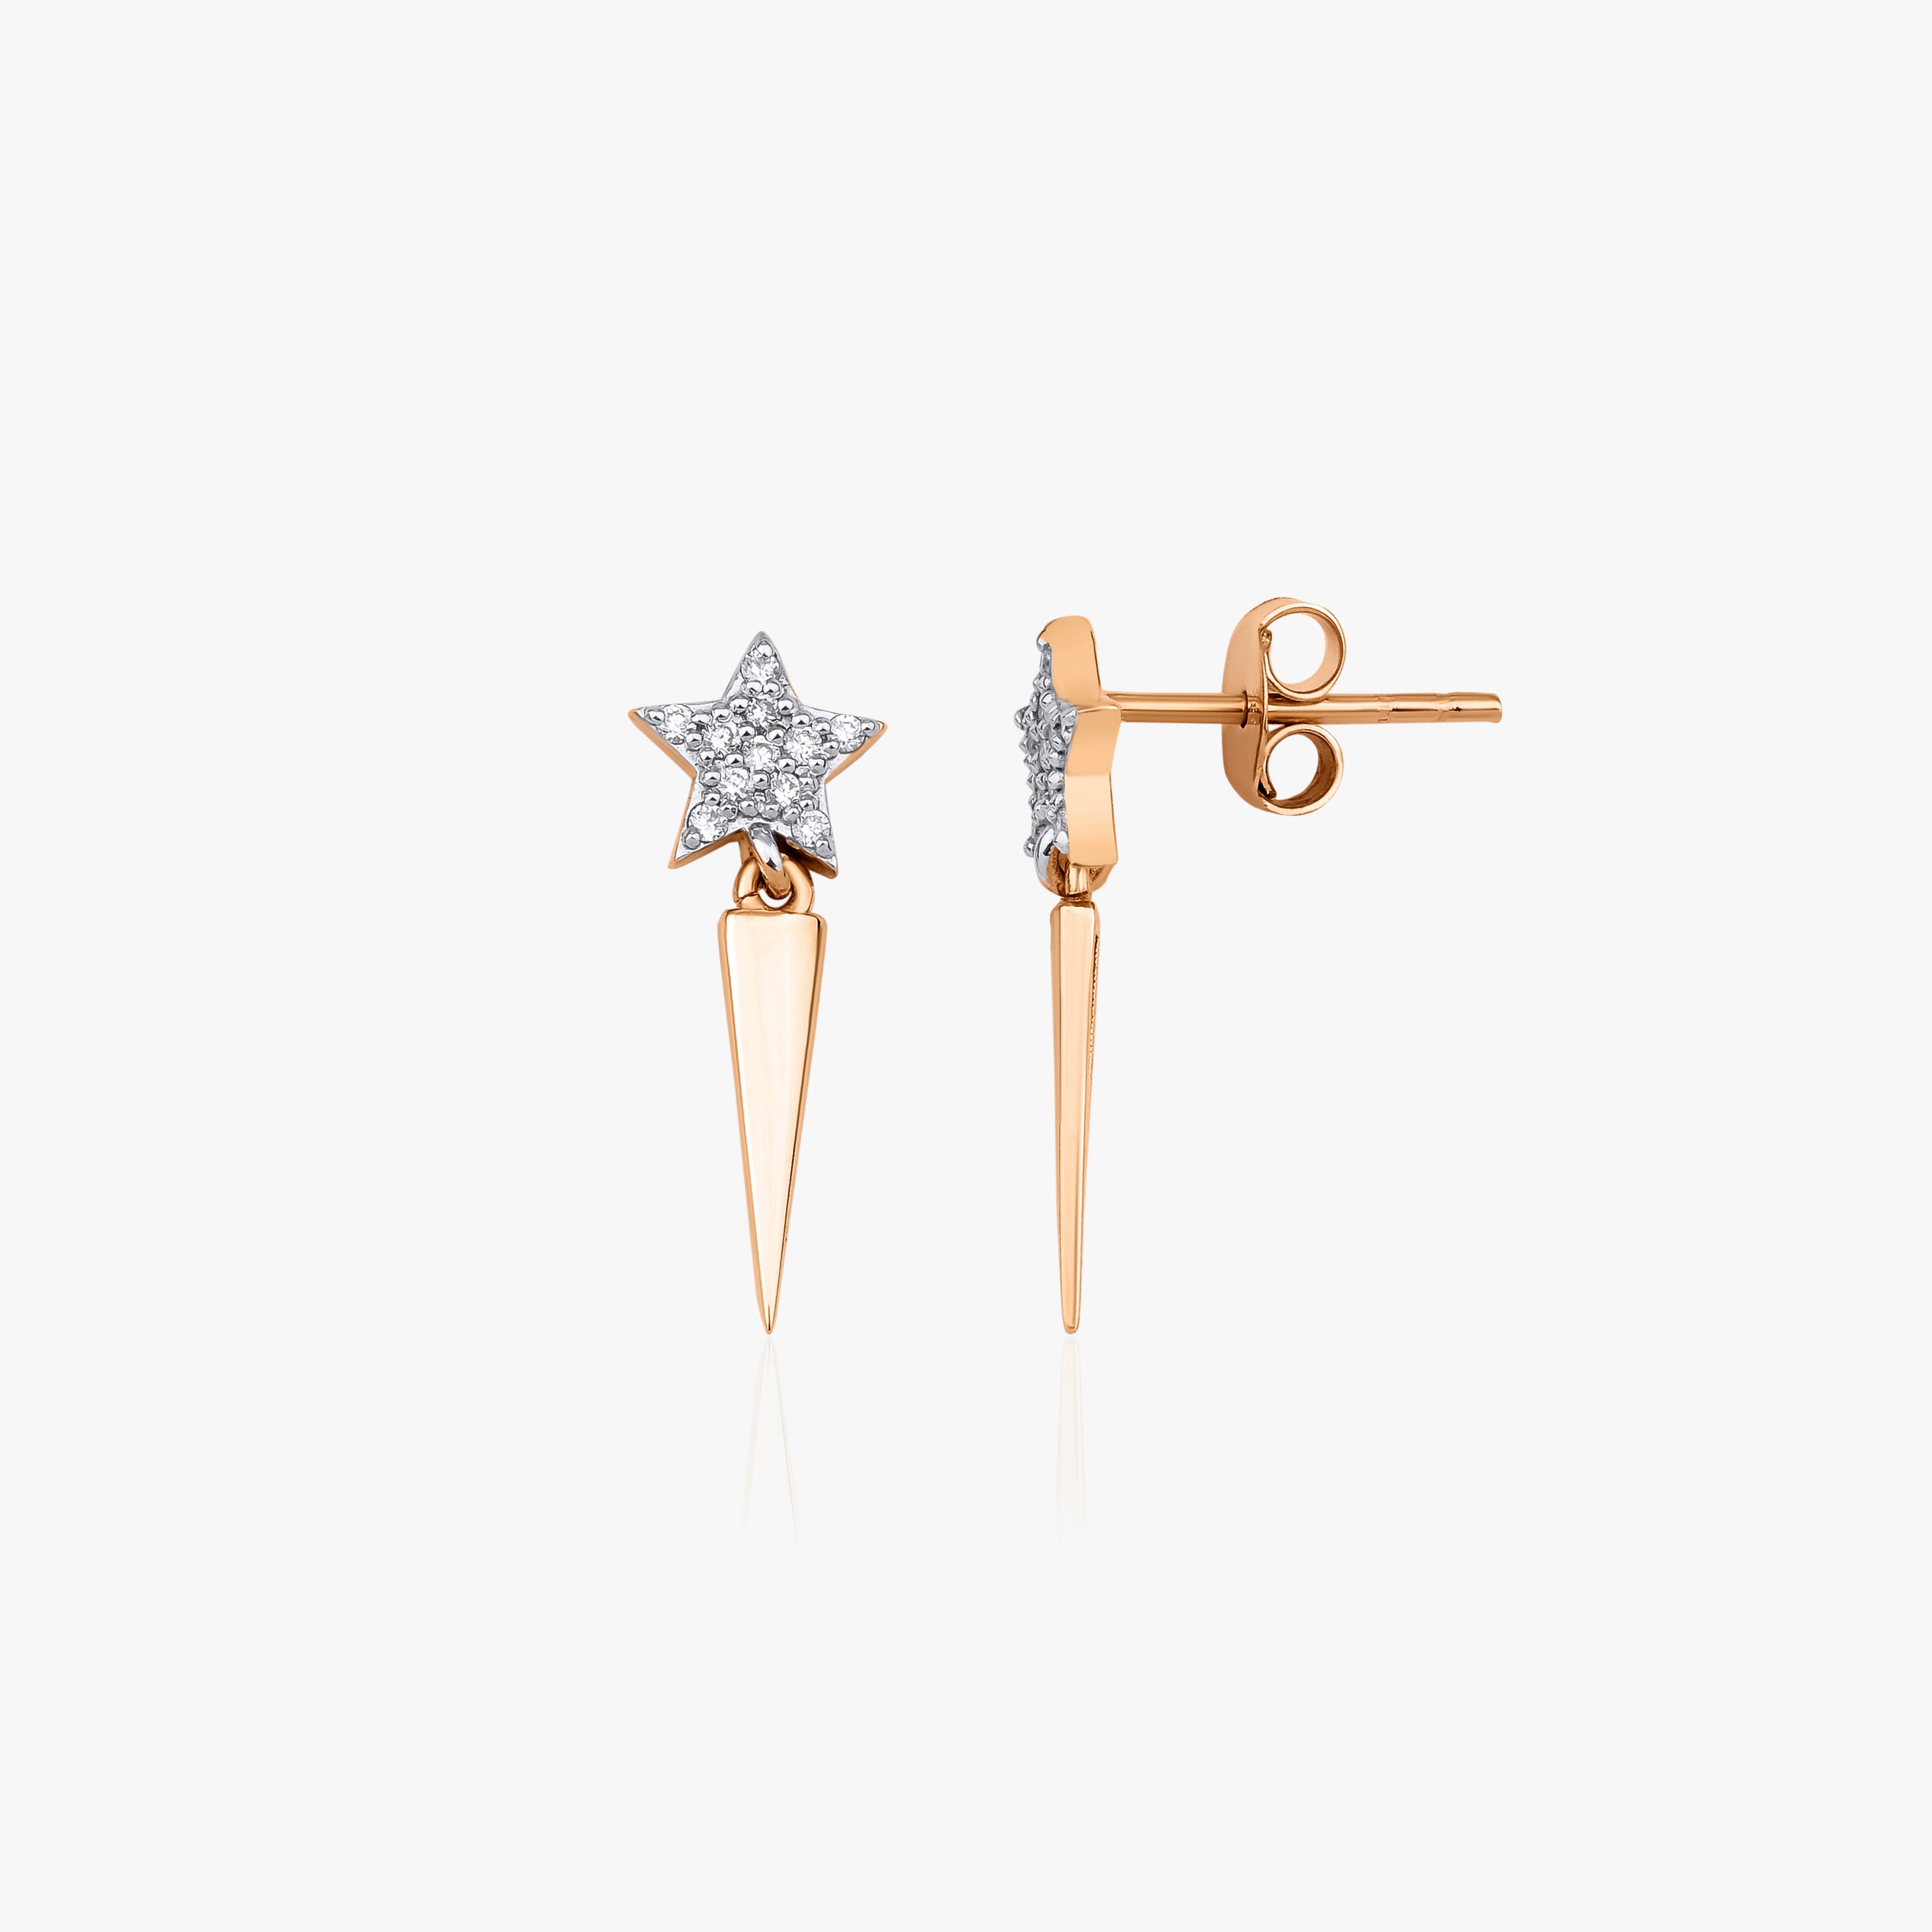 Falling Star Studs Available in 14K and 18K Gold